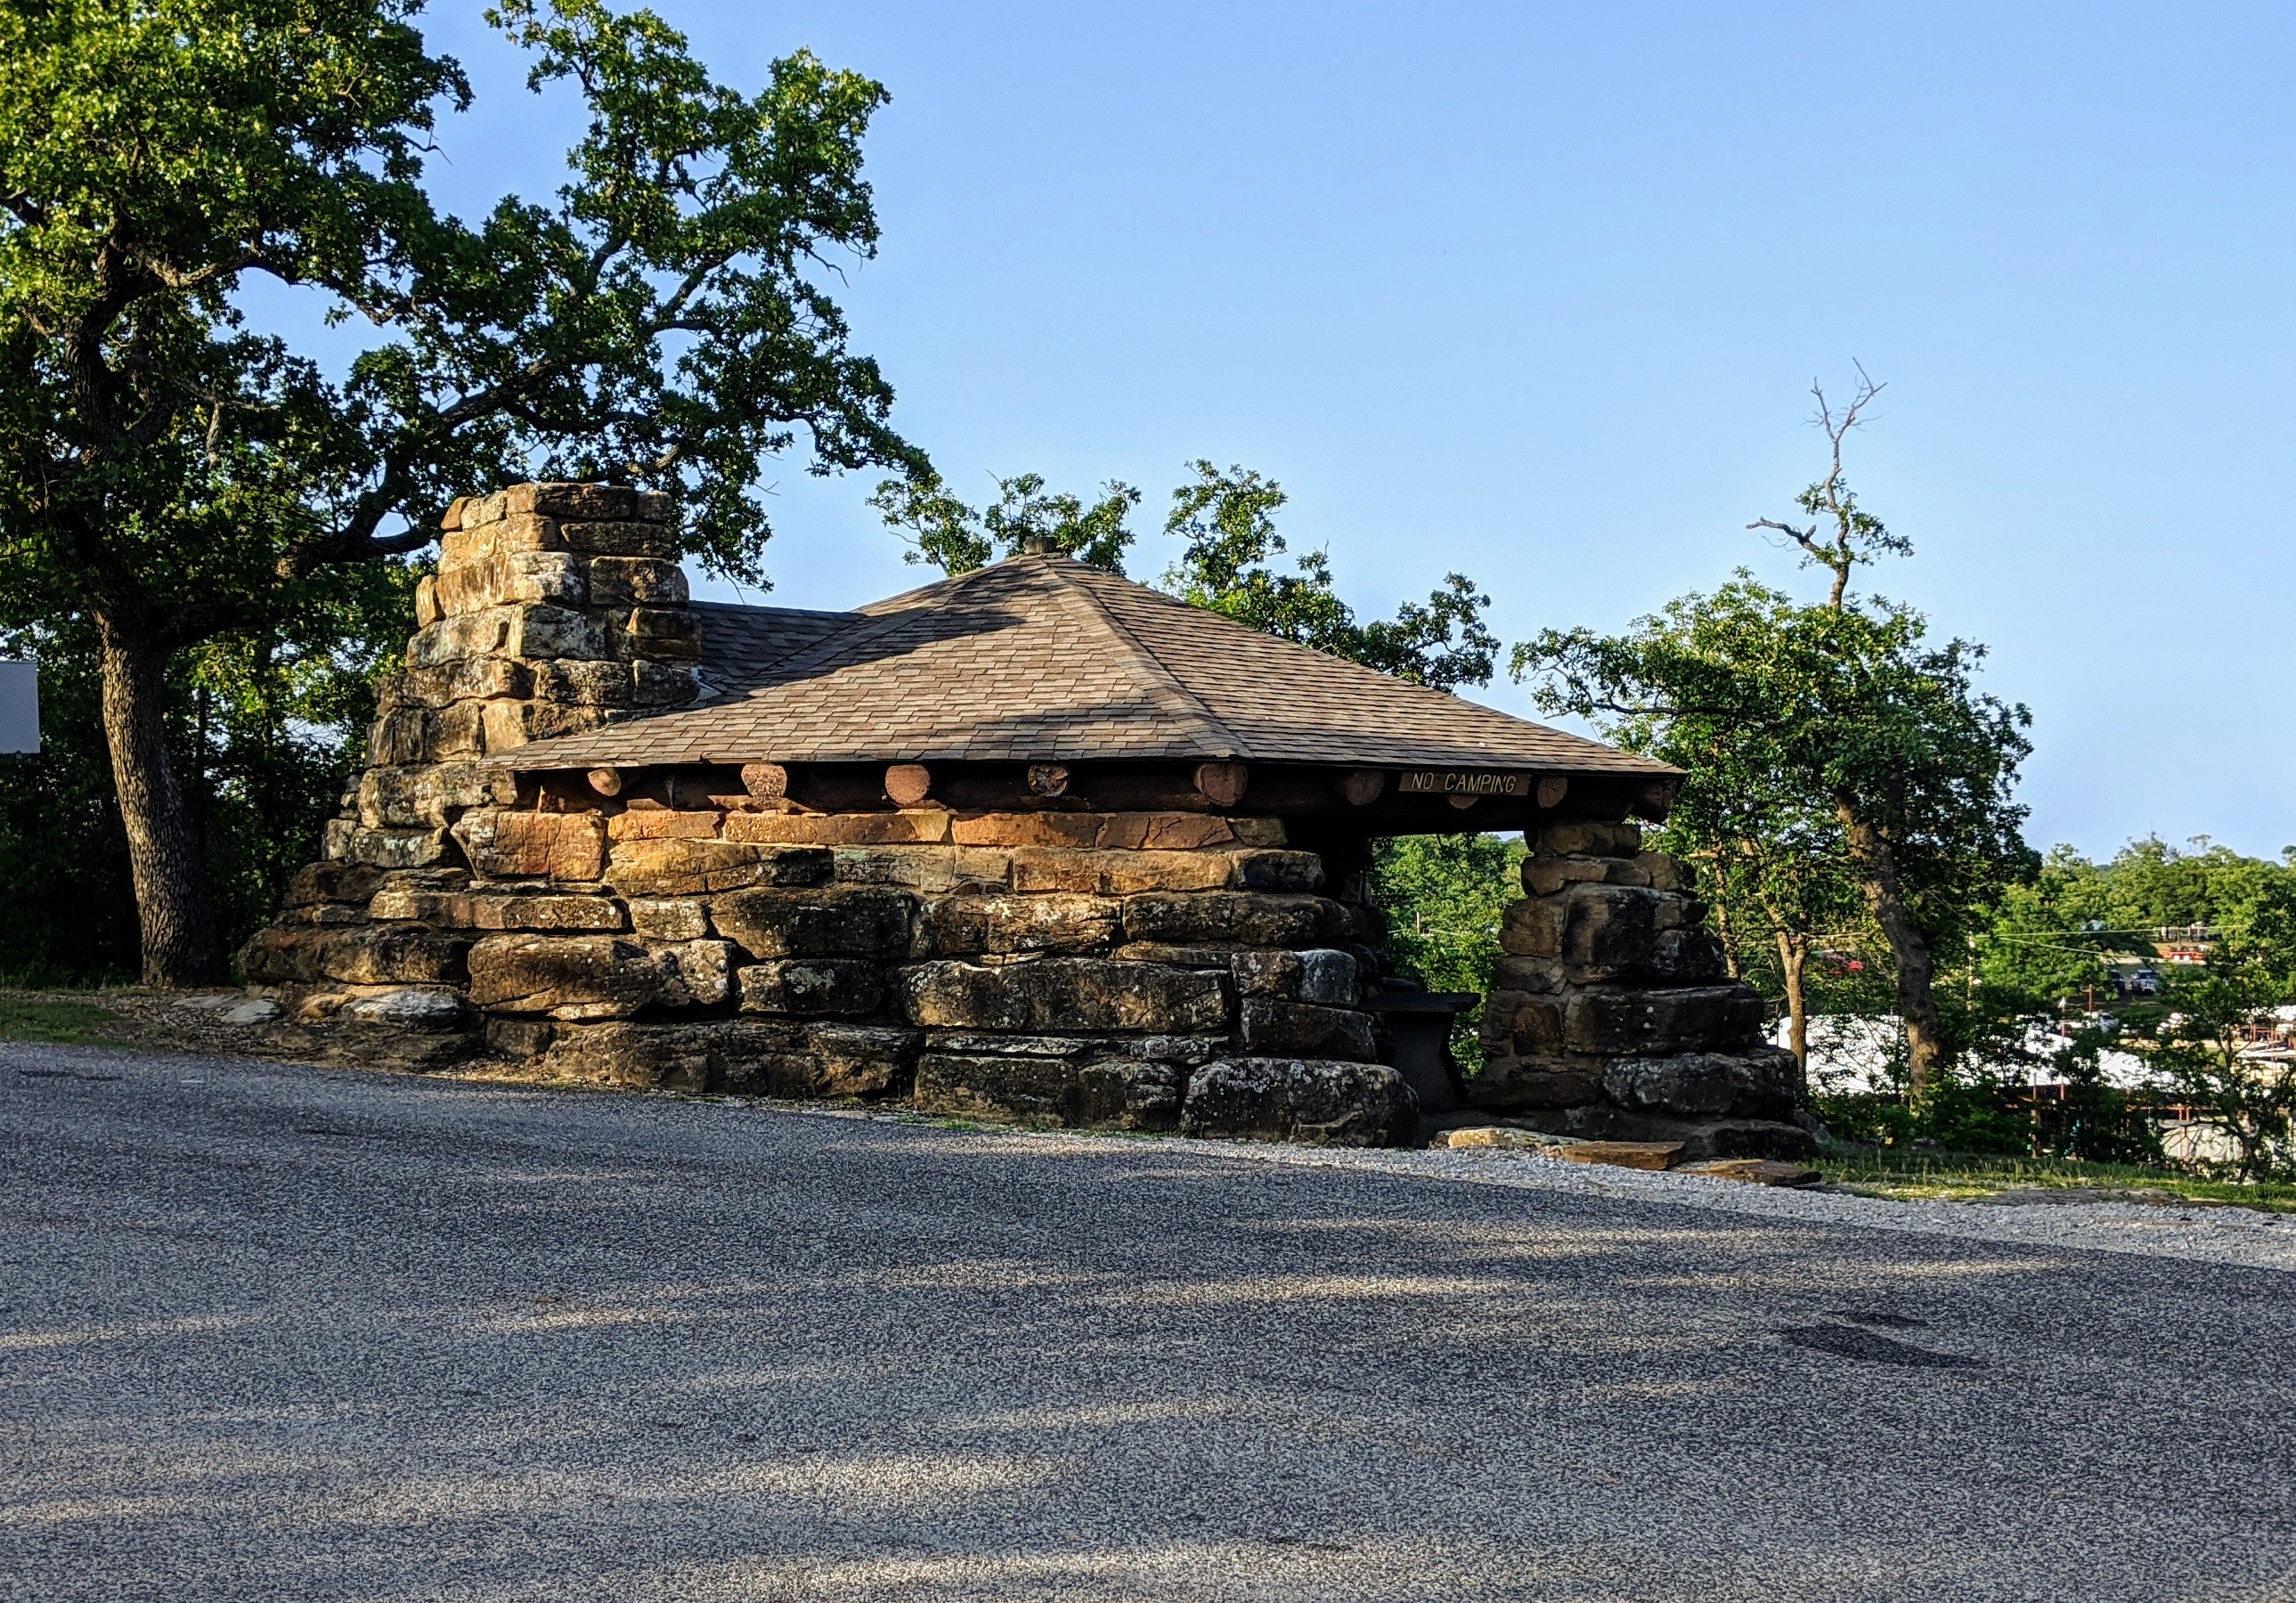 WPA-era pavilion in Buzzards Roost Campground. Great for a picnic or small get-together.